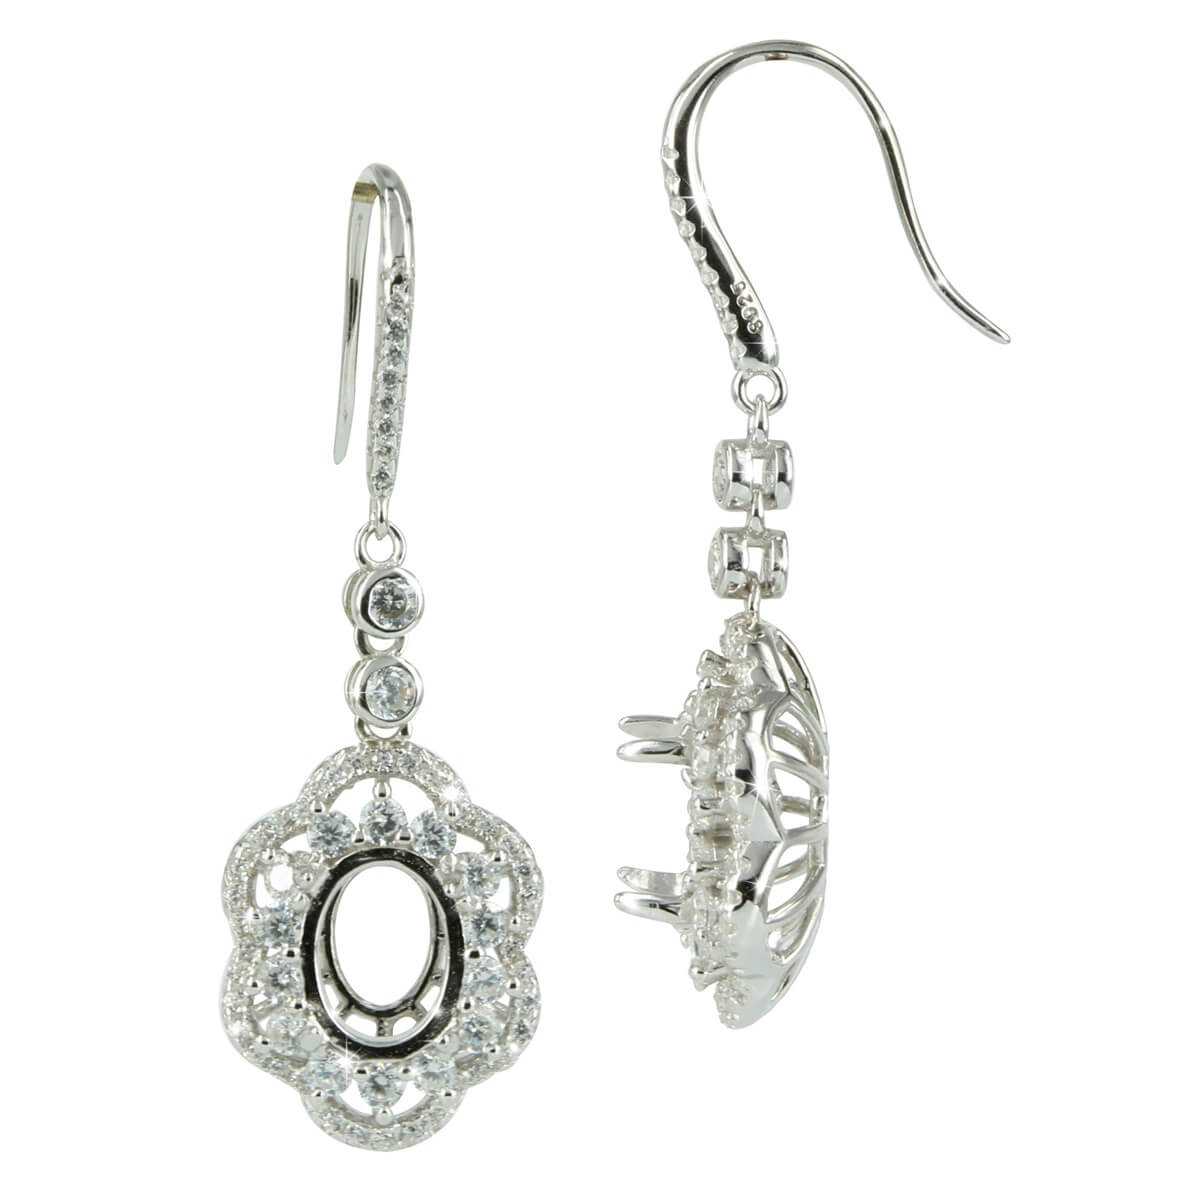 Floral Bling Earrings with Oval Setting in Sterling Silver for 7x9mm Oval Stones 